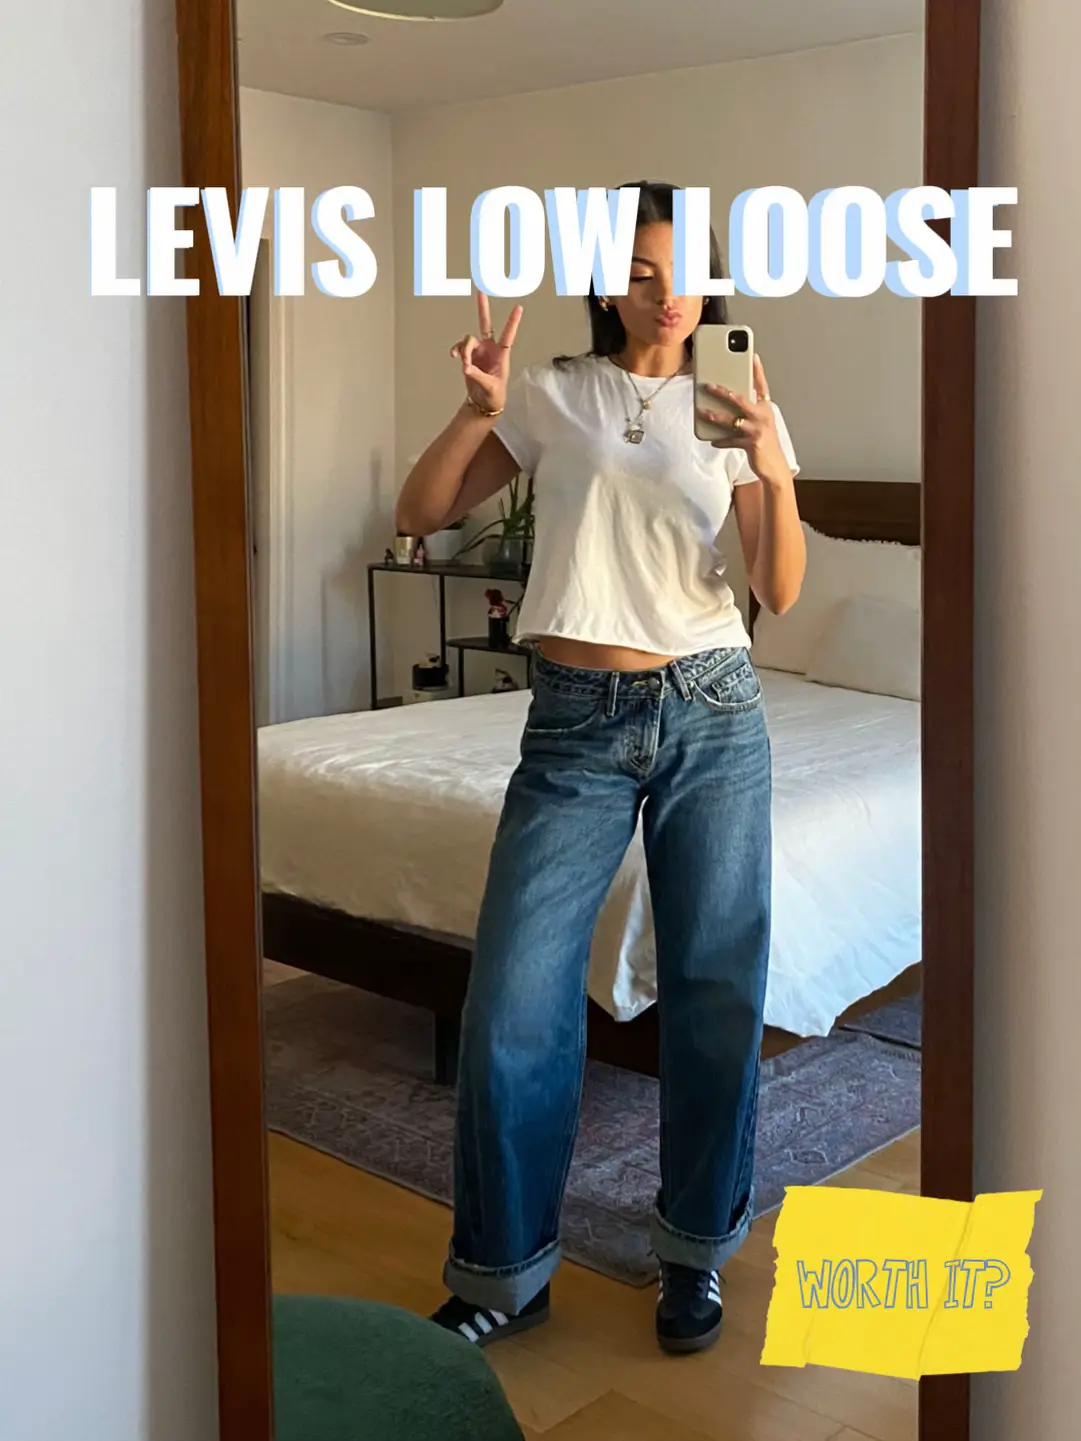 levis low loose, Gallery posted by liligvra